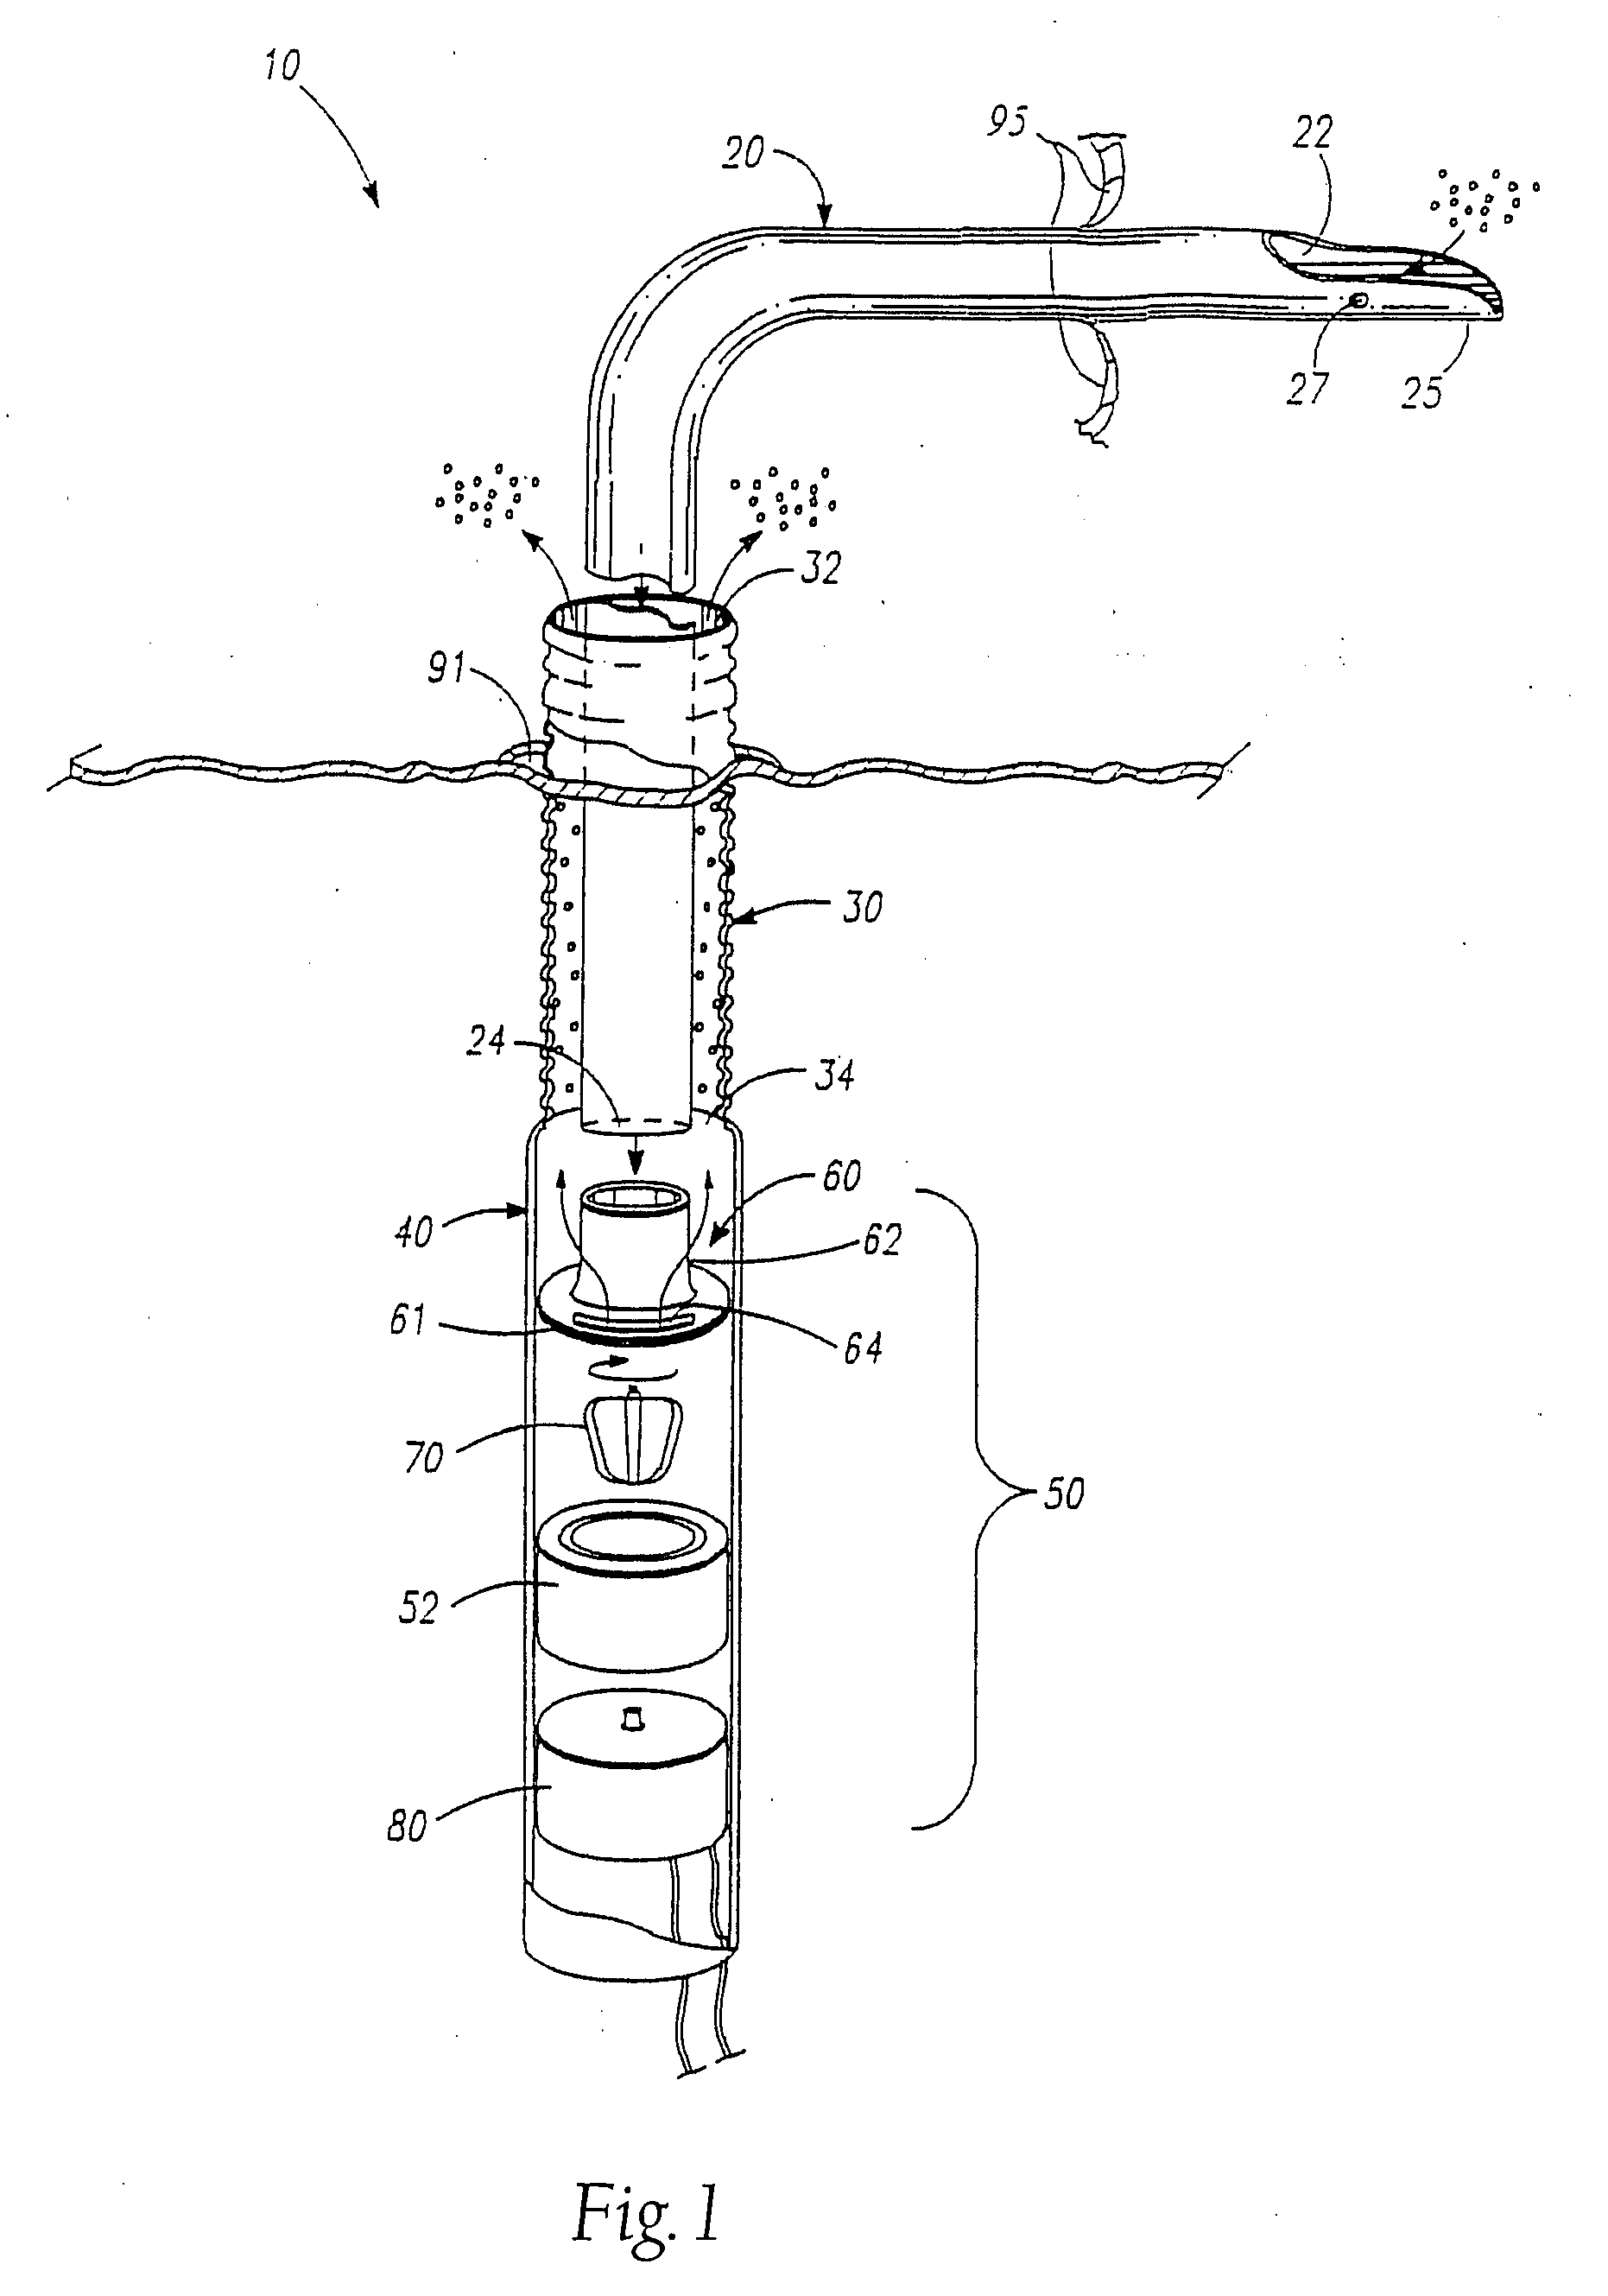 Single port cardiac support apparatus related applications